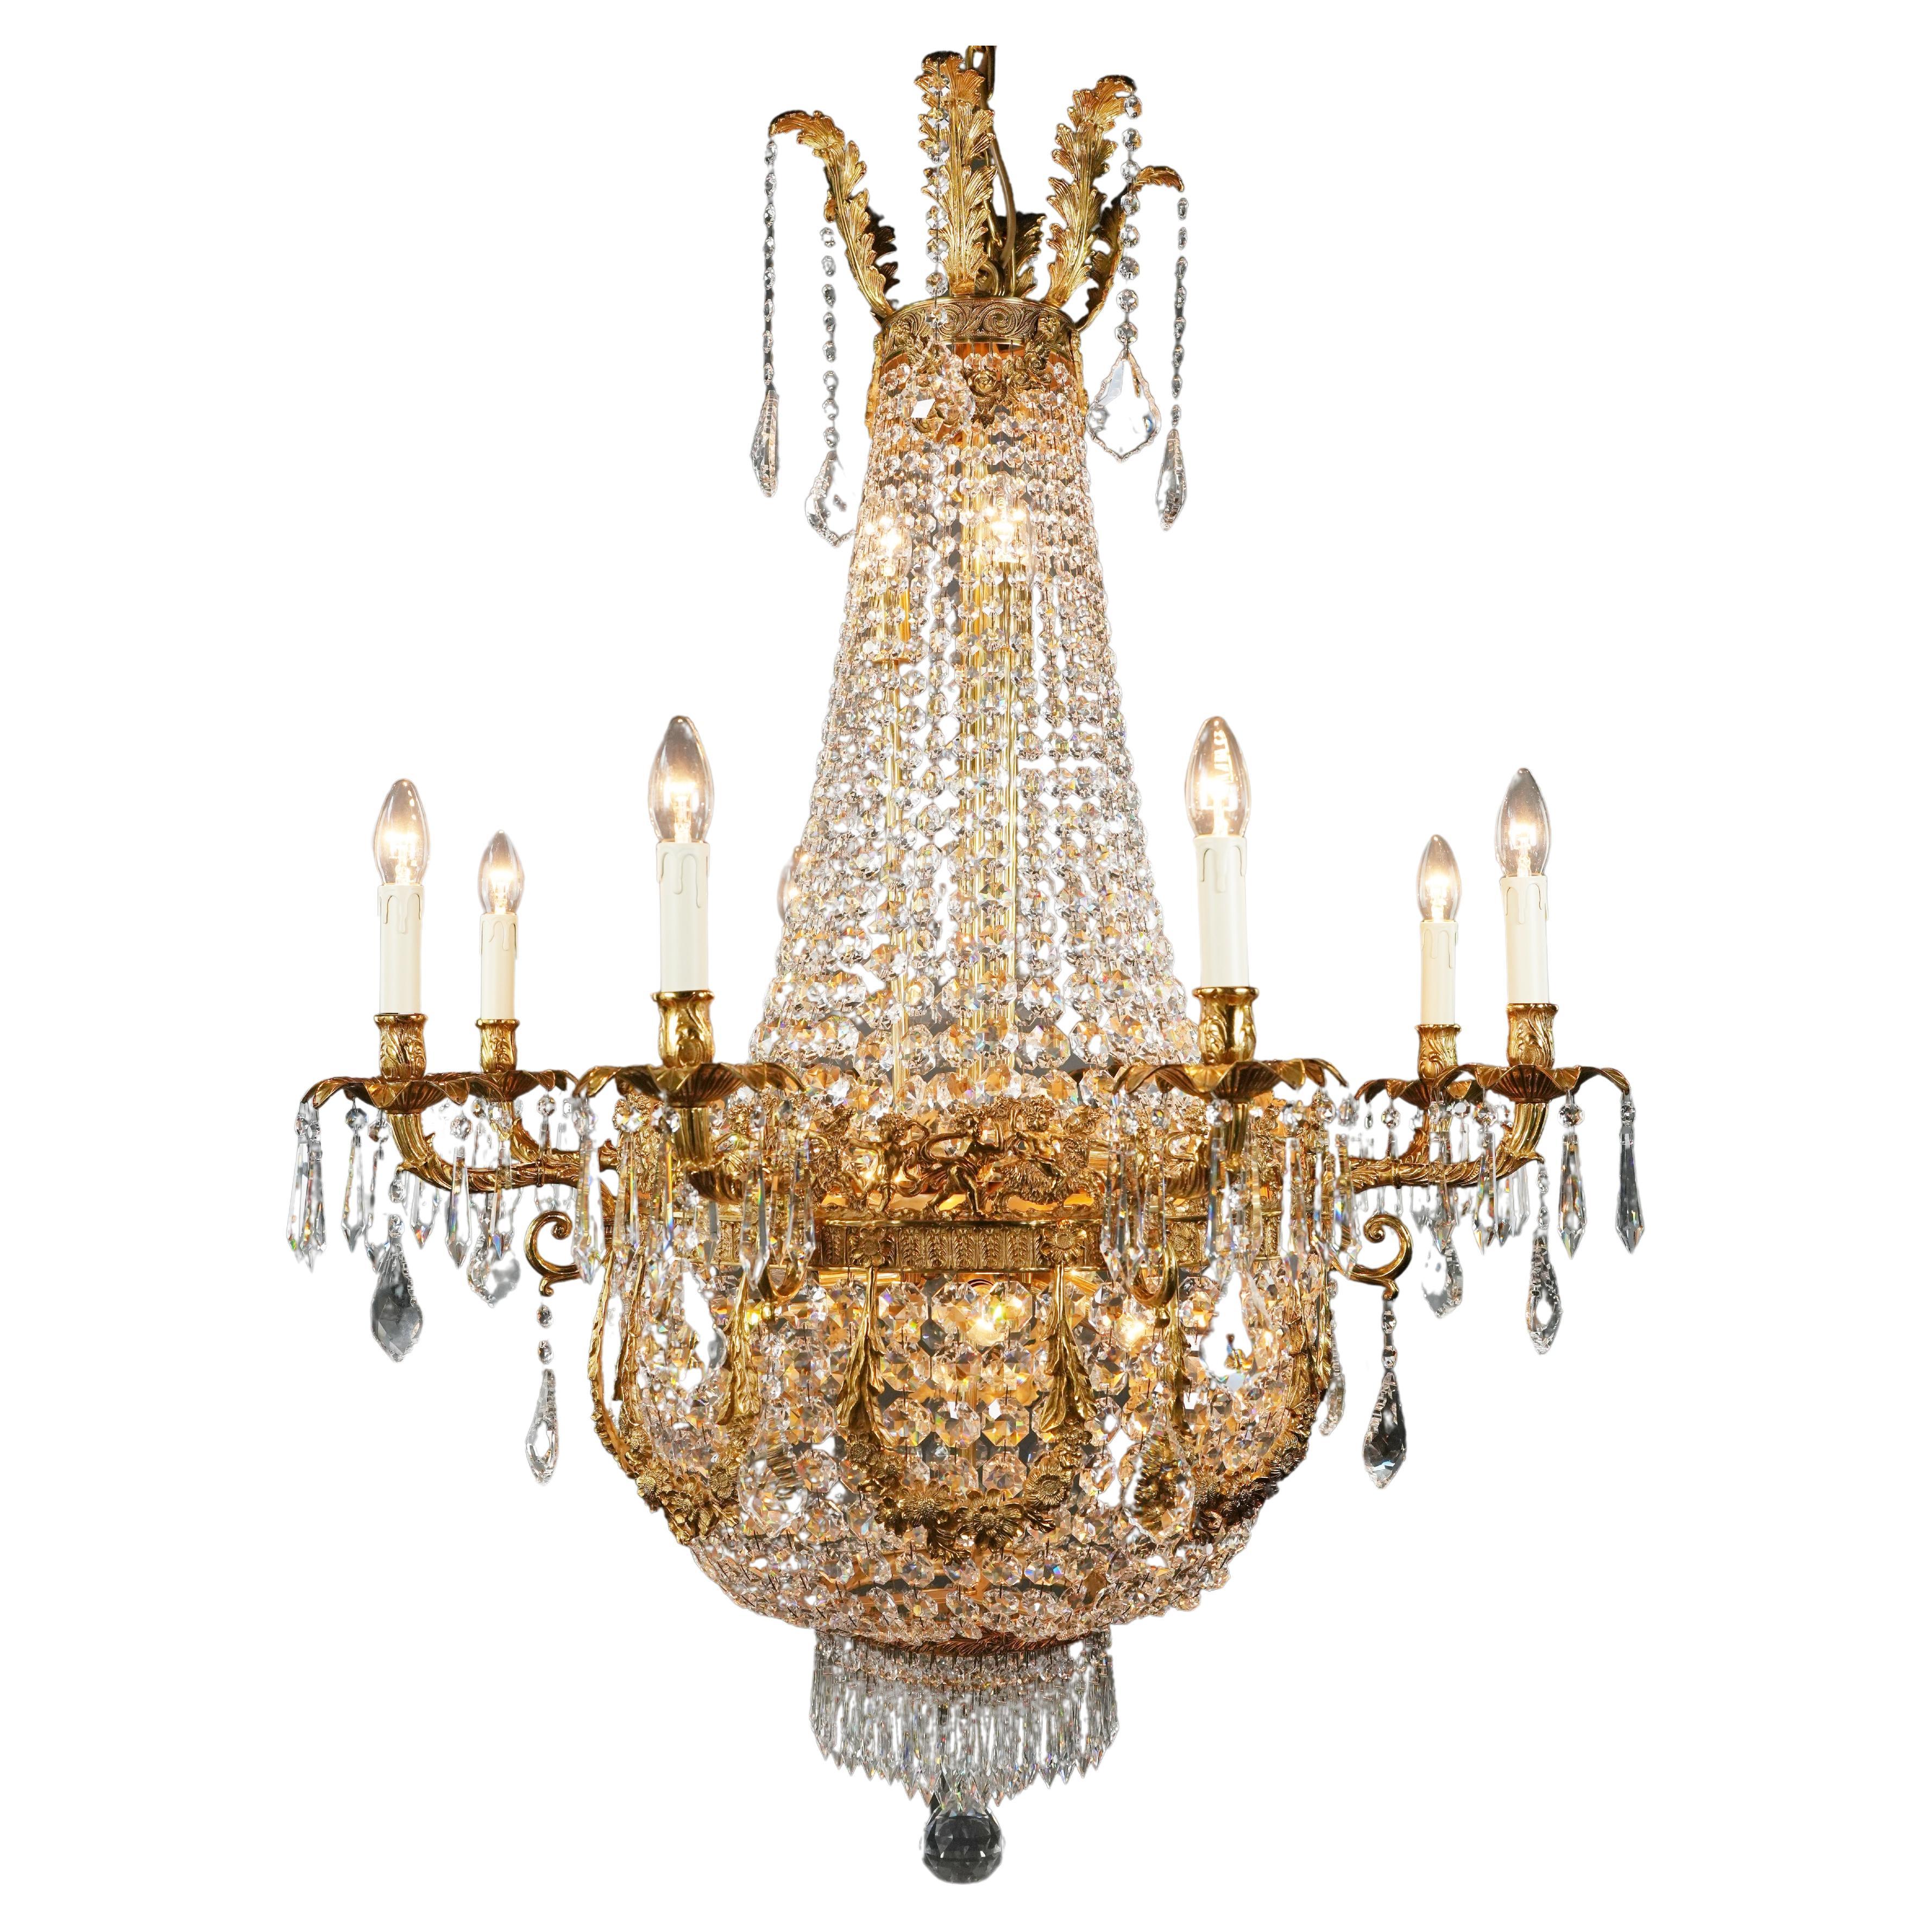 Putto Wreat Brass Basket Empire Sac a Pearl Chandelier Crystal and Antique Gold